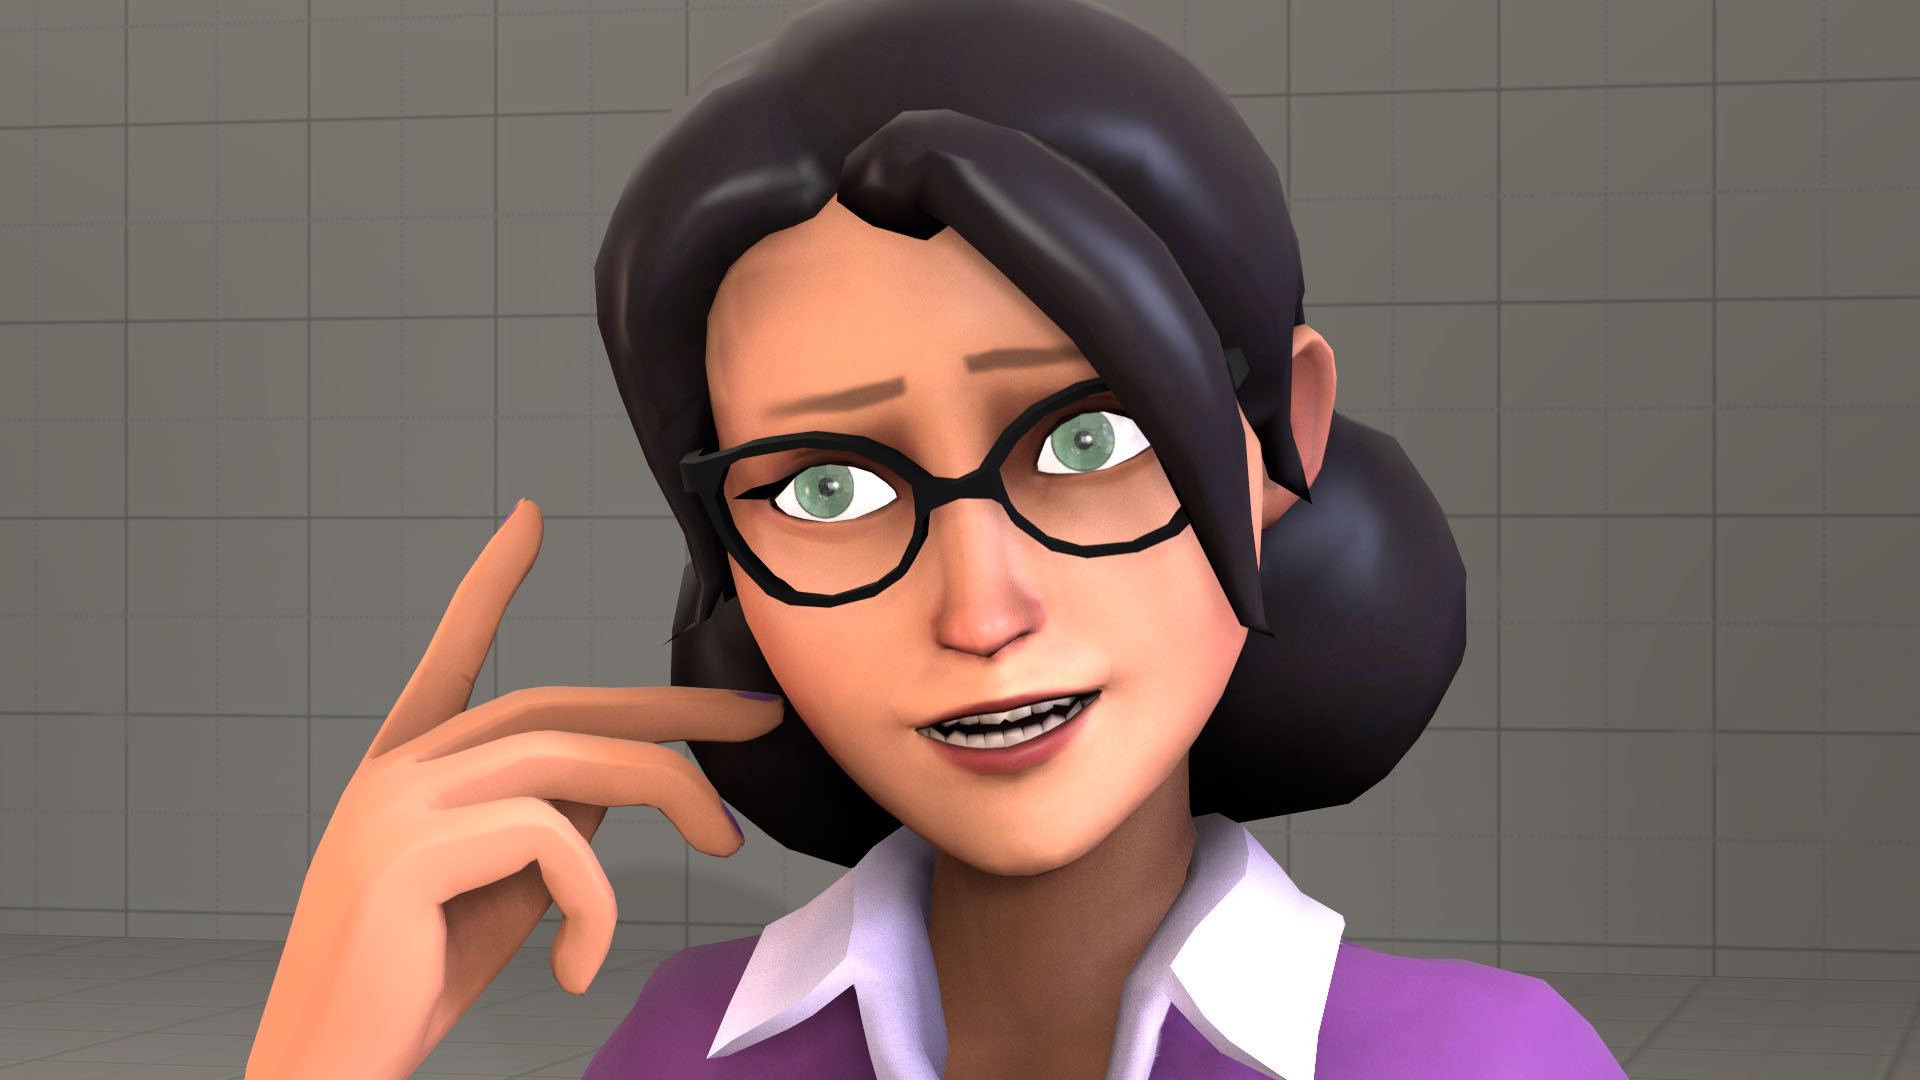 Poling face. Мисс Полинг тф2. Team Fortress 2 Miss Pauling. Мисс Полинг tf2. Tf2 Scout and Miss Pauling.